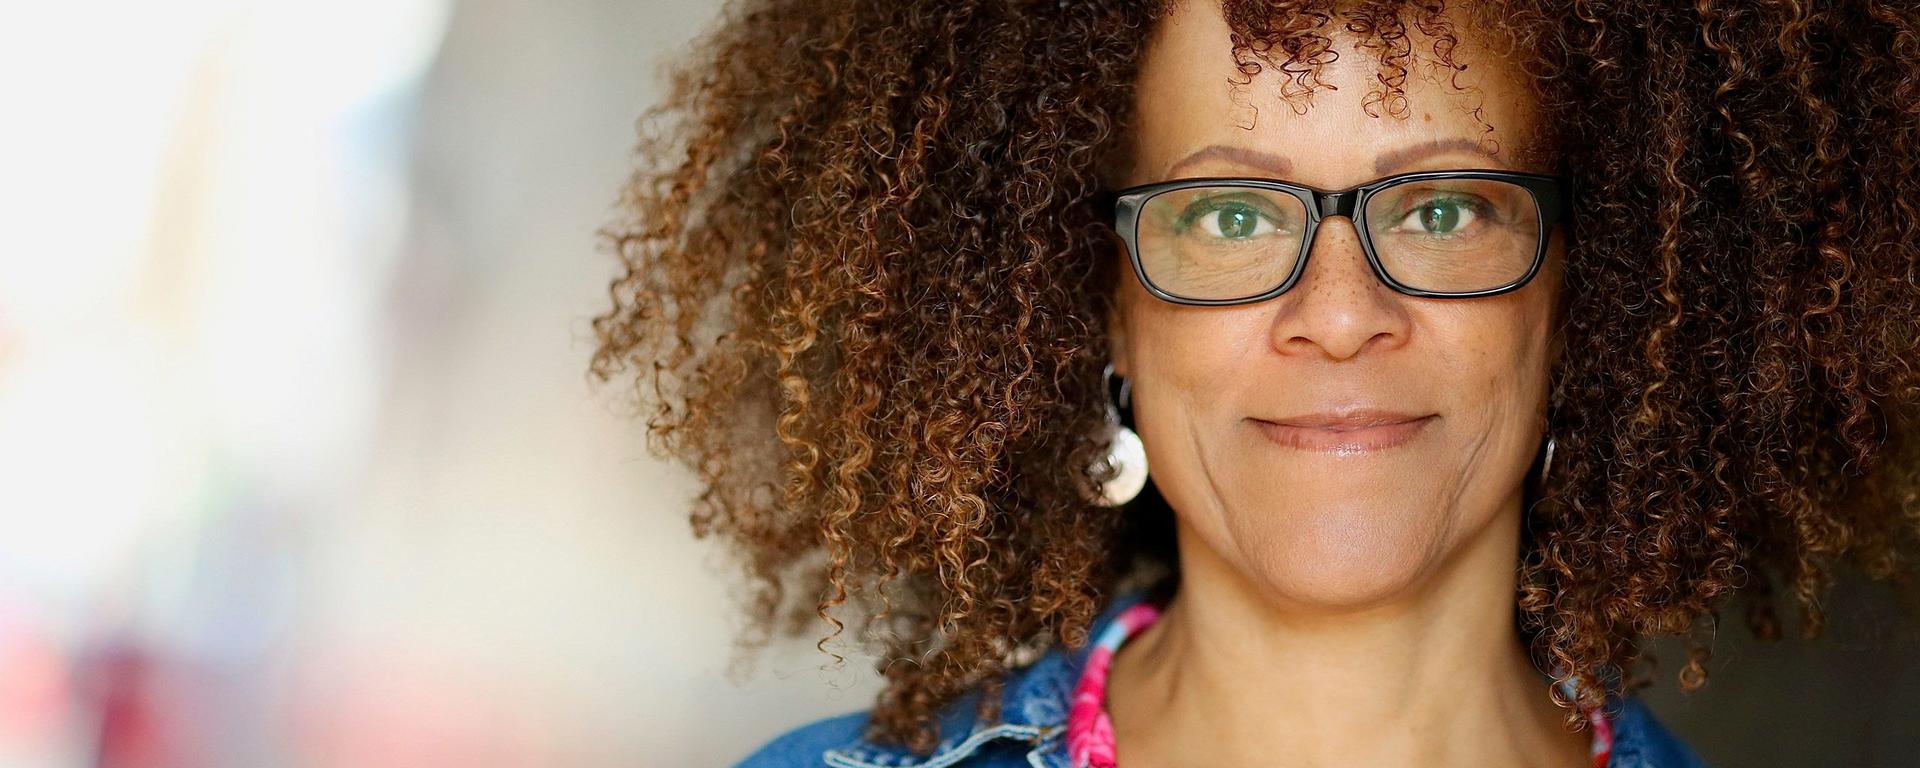 Head shot of 2021-22 Distinguished Visiting Writer Bernardine Evaristo. She wears silvery earrings, dark rimmed glasses, and a jean jacket over a pink floral blouse.